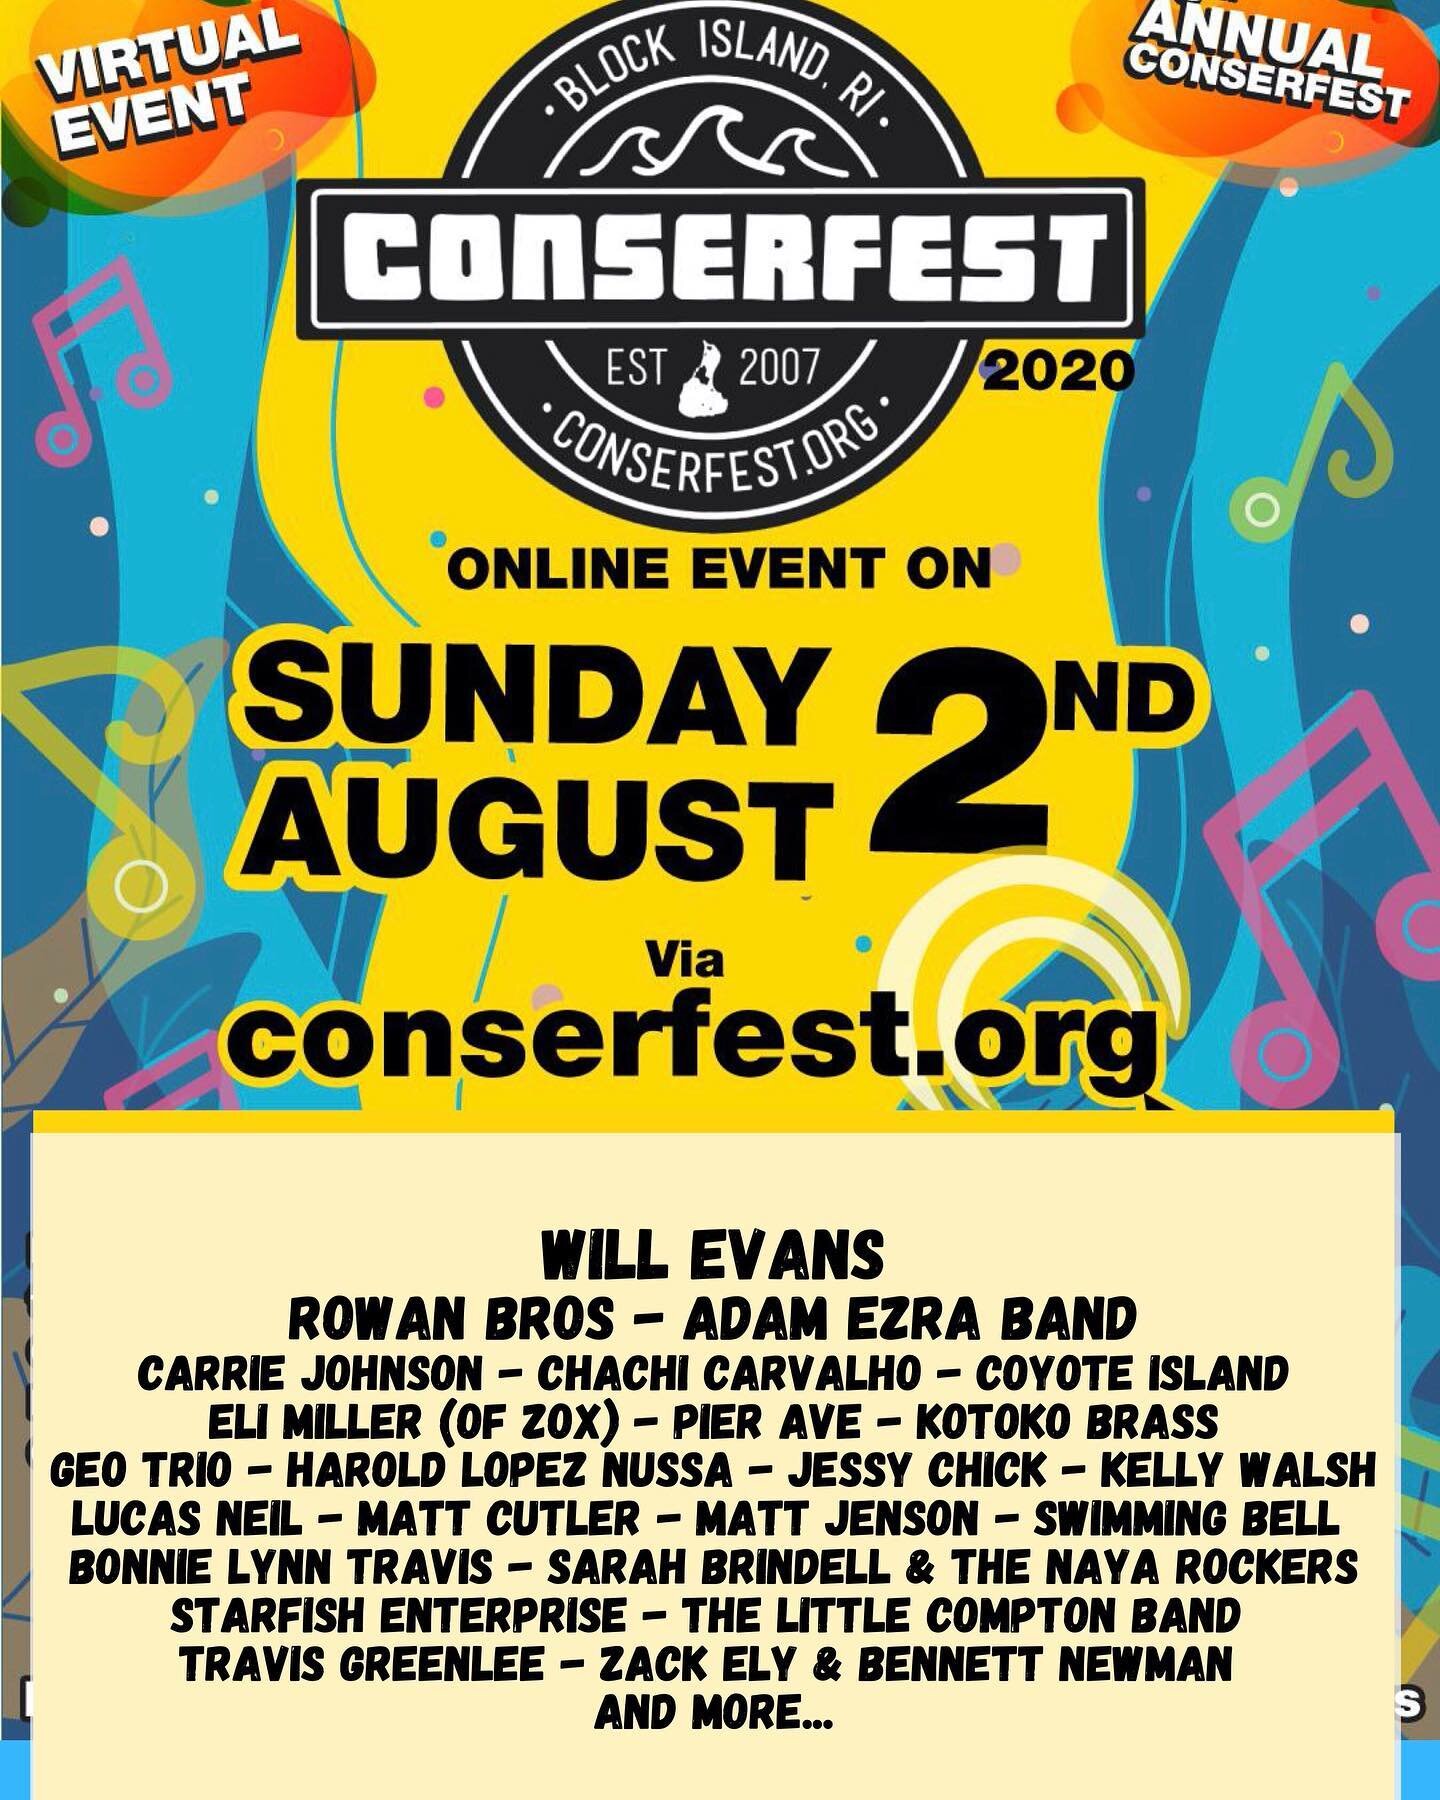 TUNE IN NOW!!! Head to our website conserfest.org or click on the link in our bio to watch ✨ #conserfest2020 #peaceloveconserfest #musiconamission